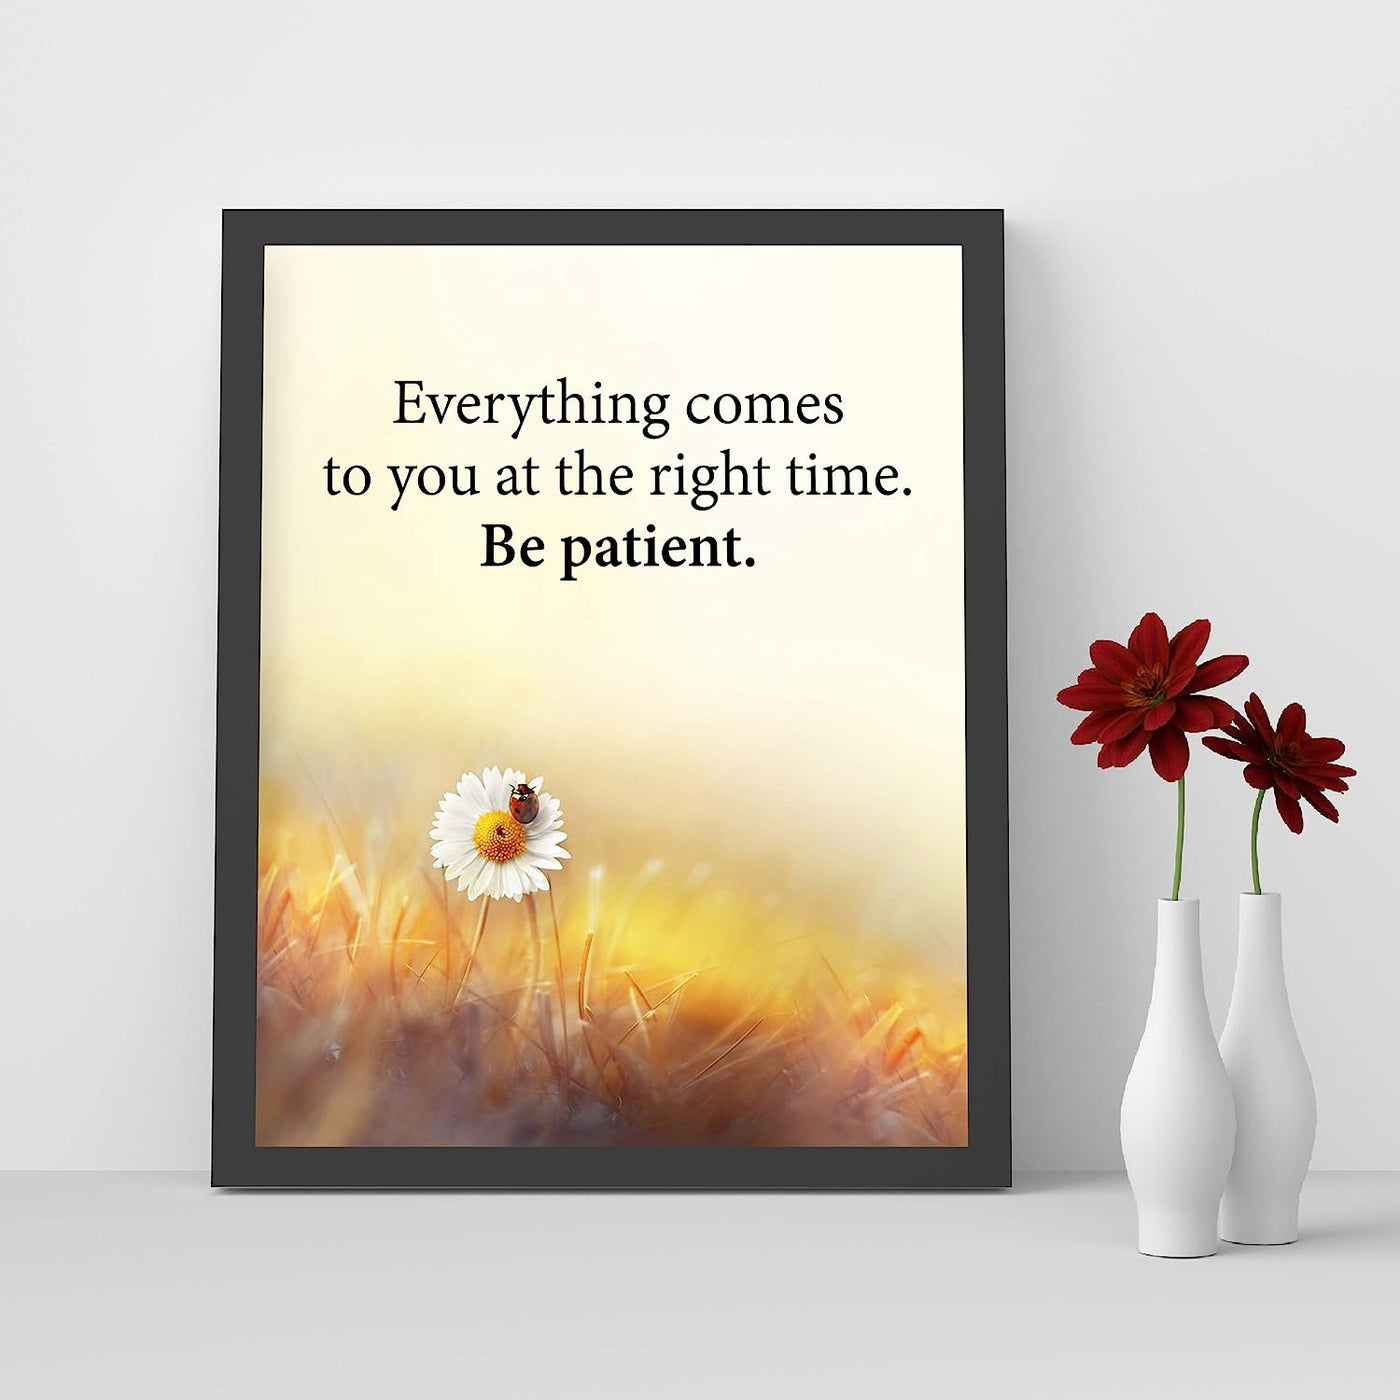 Everything Comes to You at the Right Time Inspirational Quotes Wall Art -8 x 10" Floral Print w/Ladybug Image-Ready to Frame. Motivational Home-Office-School-Dorm Decor. Great Gift of Inspiration!